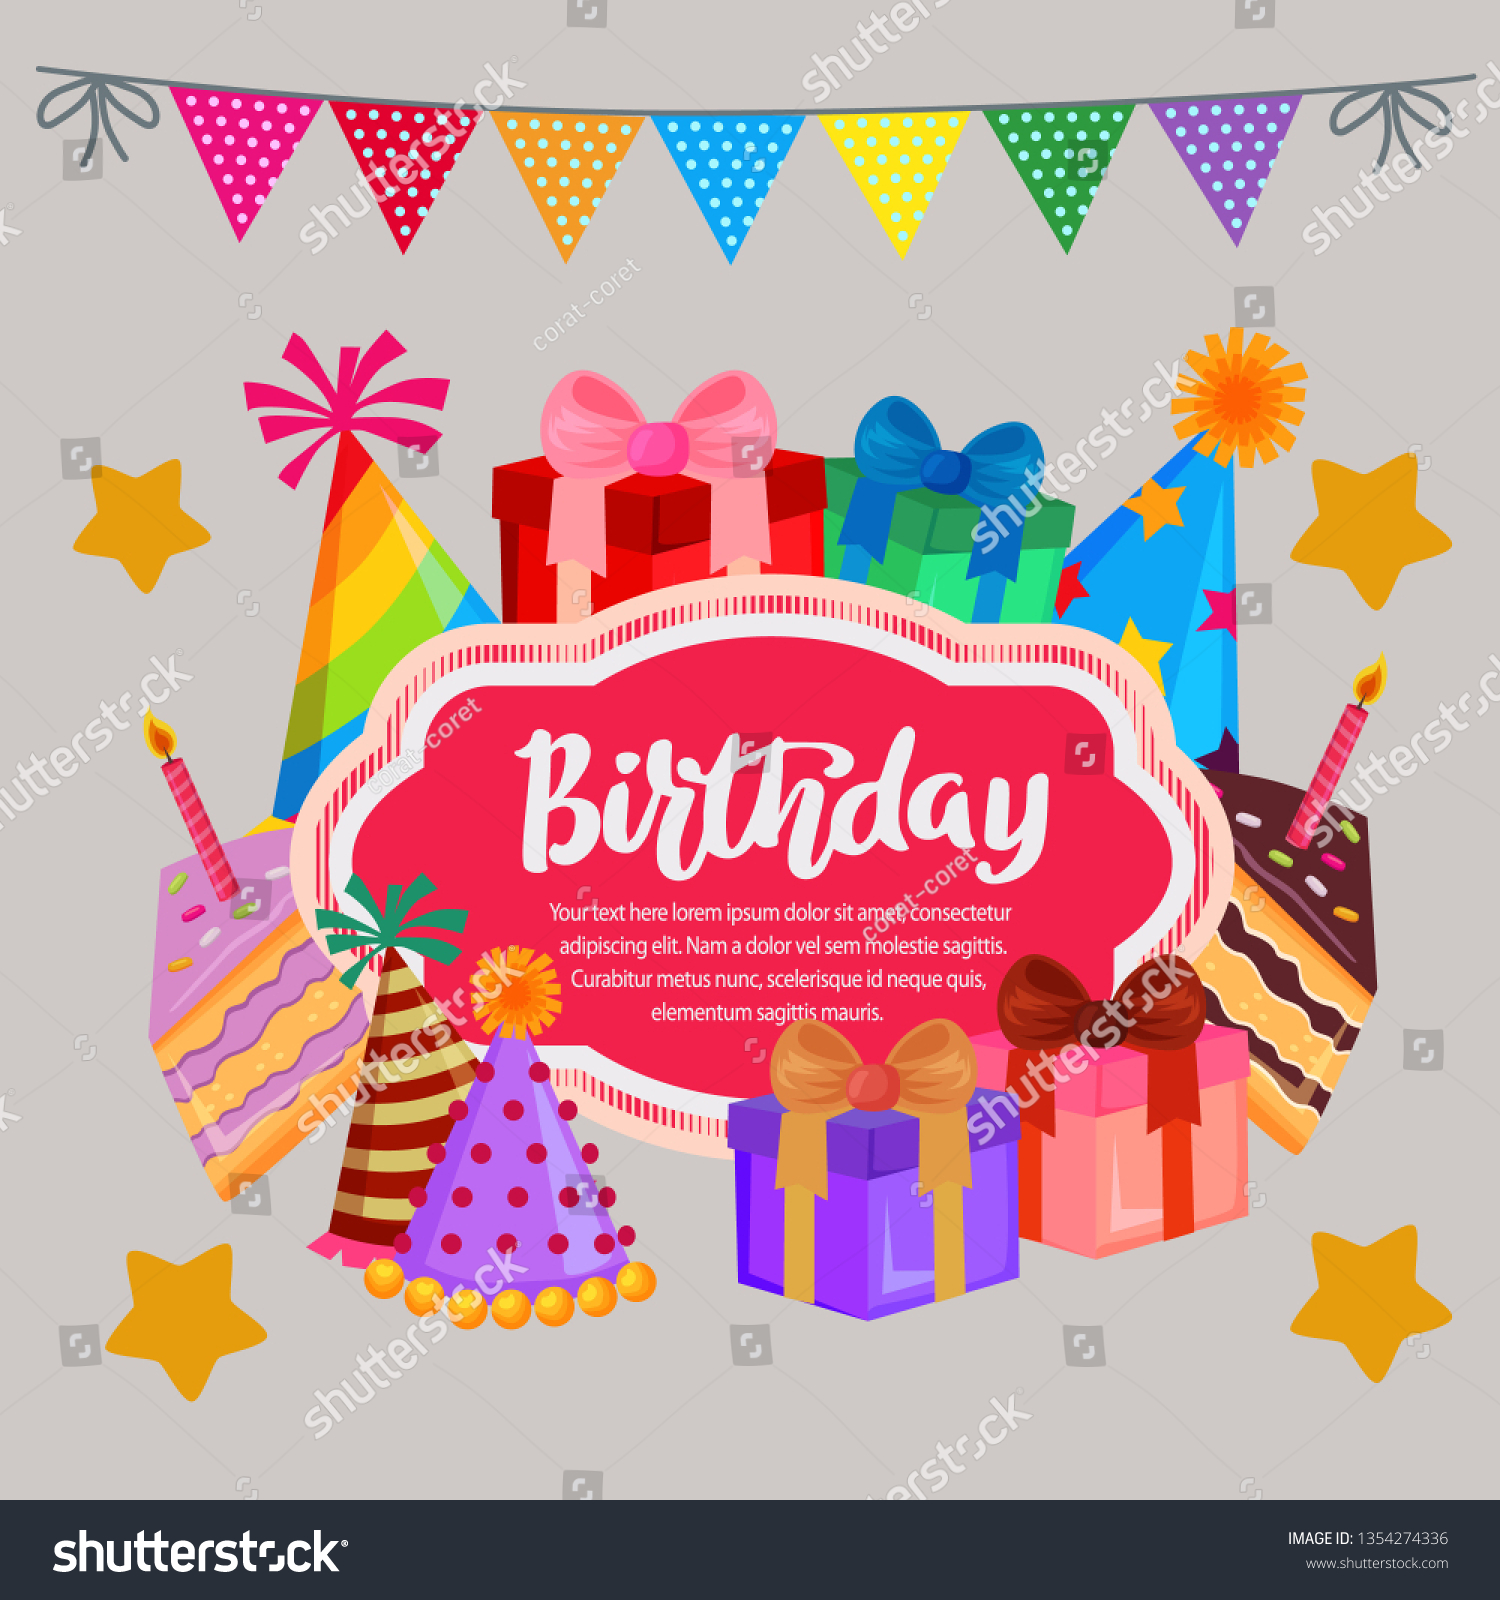 Flat Birthday Card Party Gift Party Stock Vector (Royalty Free ...